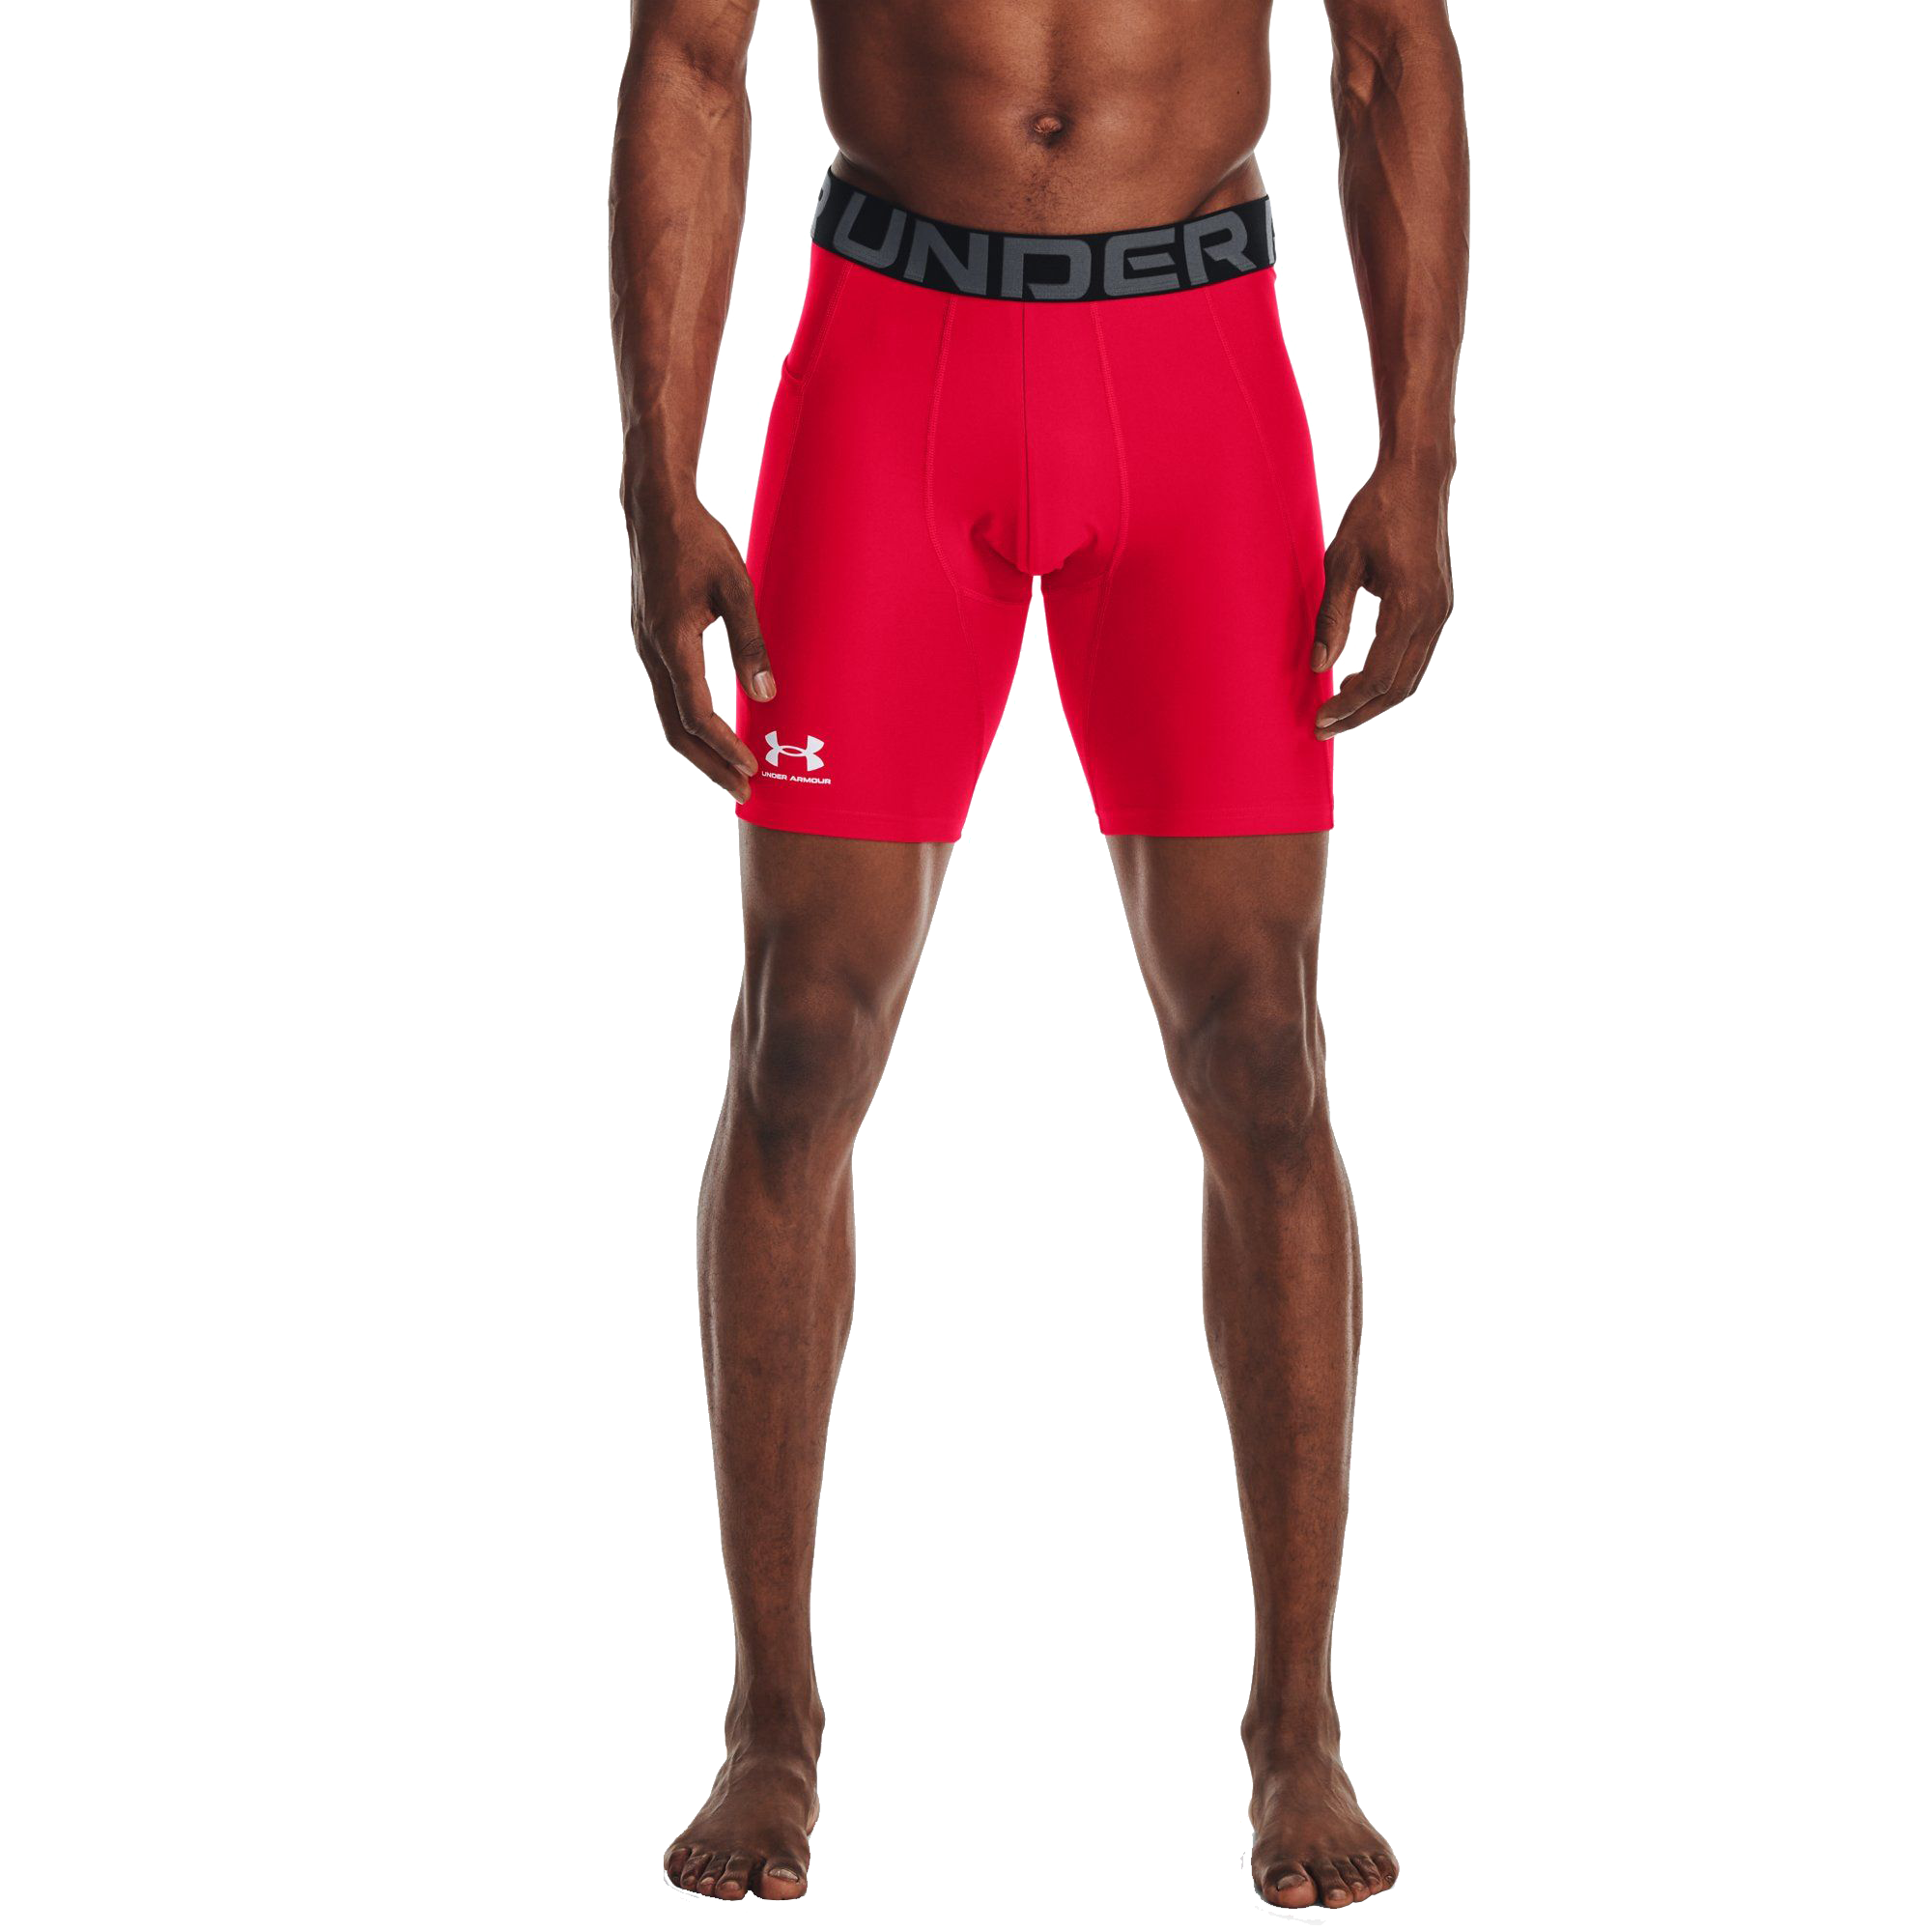 Under Armour HeatGear Armour Compression Shorts for Men - Red/White - 3XLT